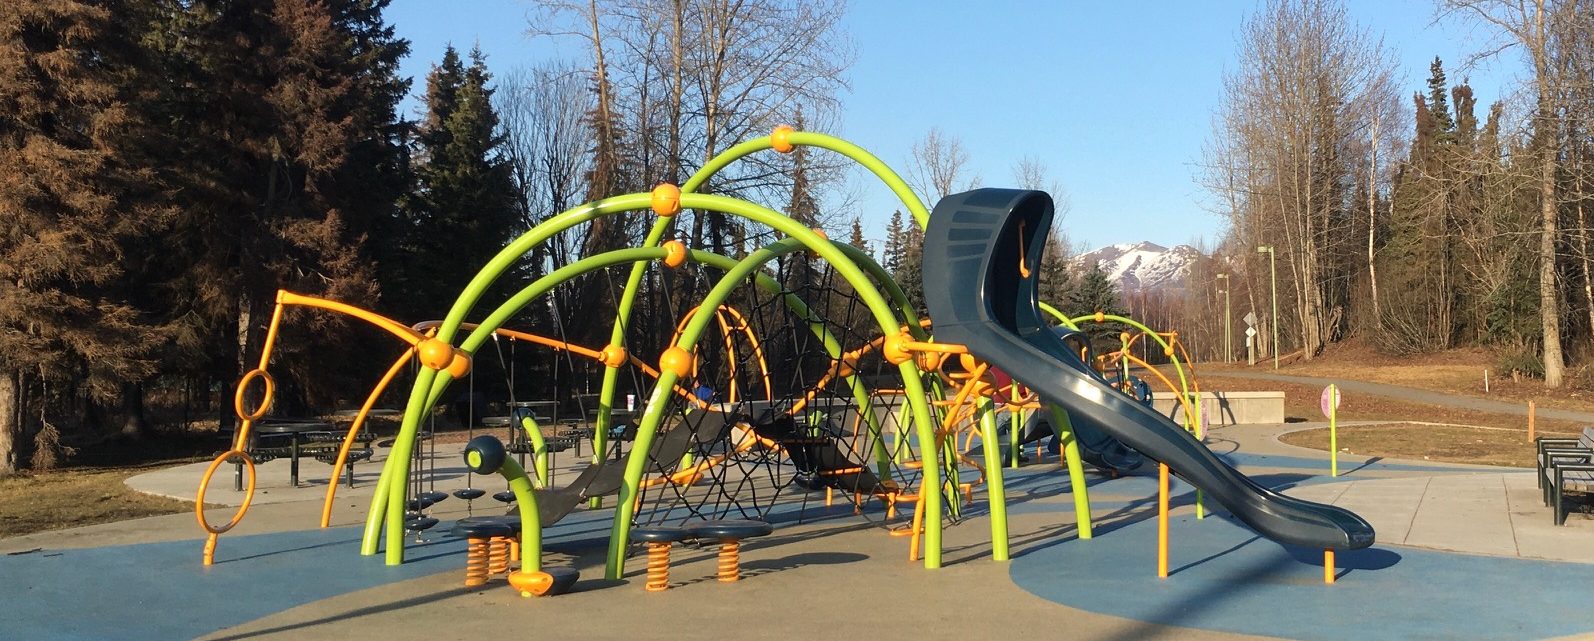 A playground with a slide and arches to climb on.